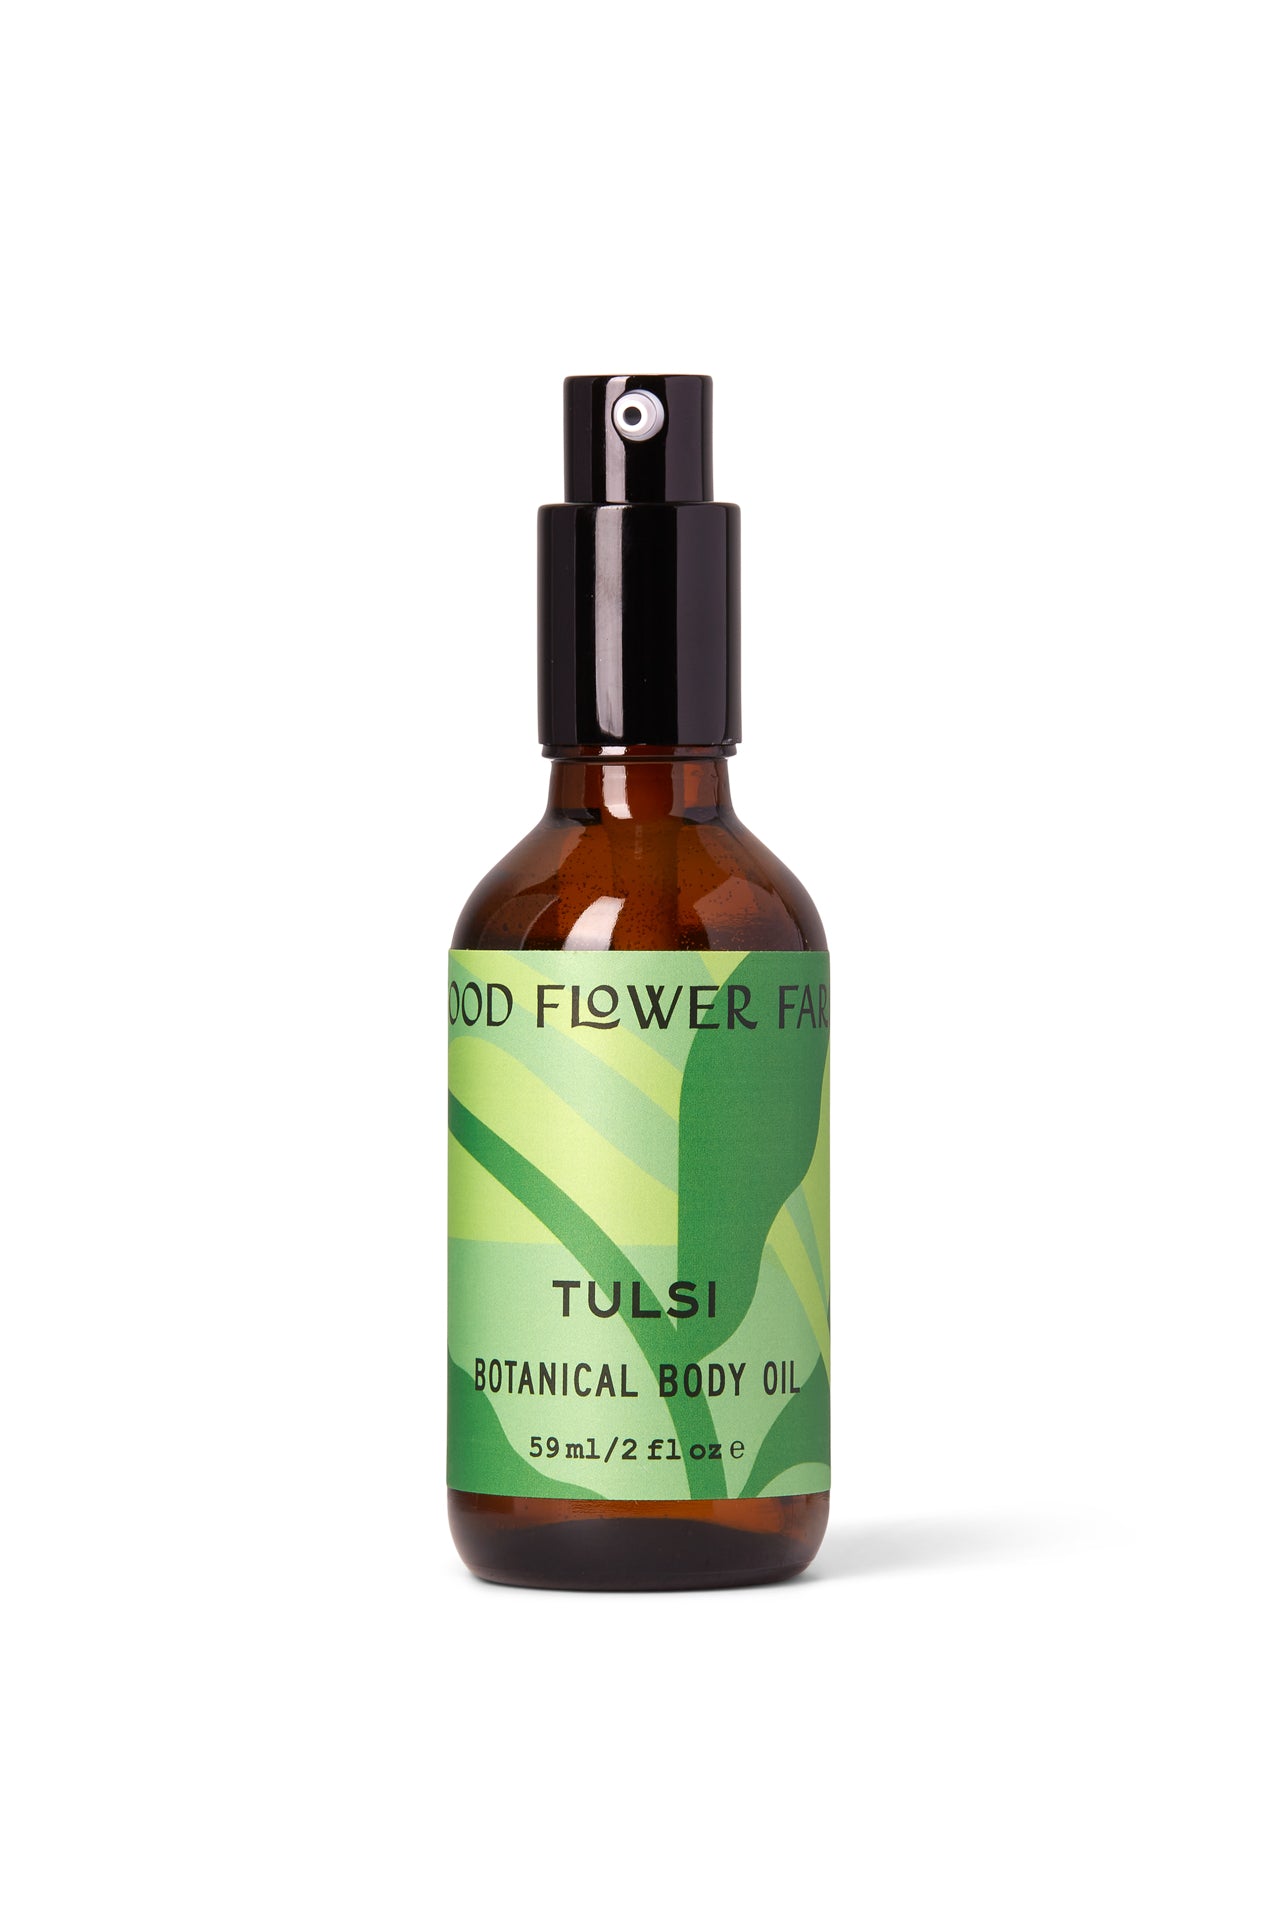 Tulsi botanical body oil made with organic farm-grown tulsi/holy basil infused in oil by Good Flower Farm